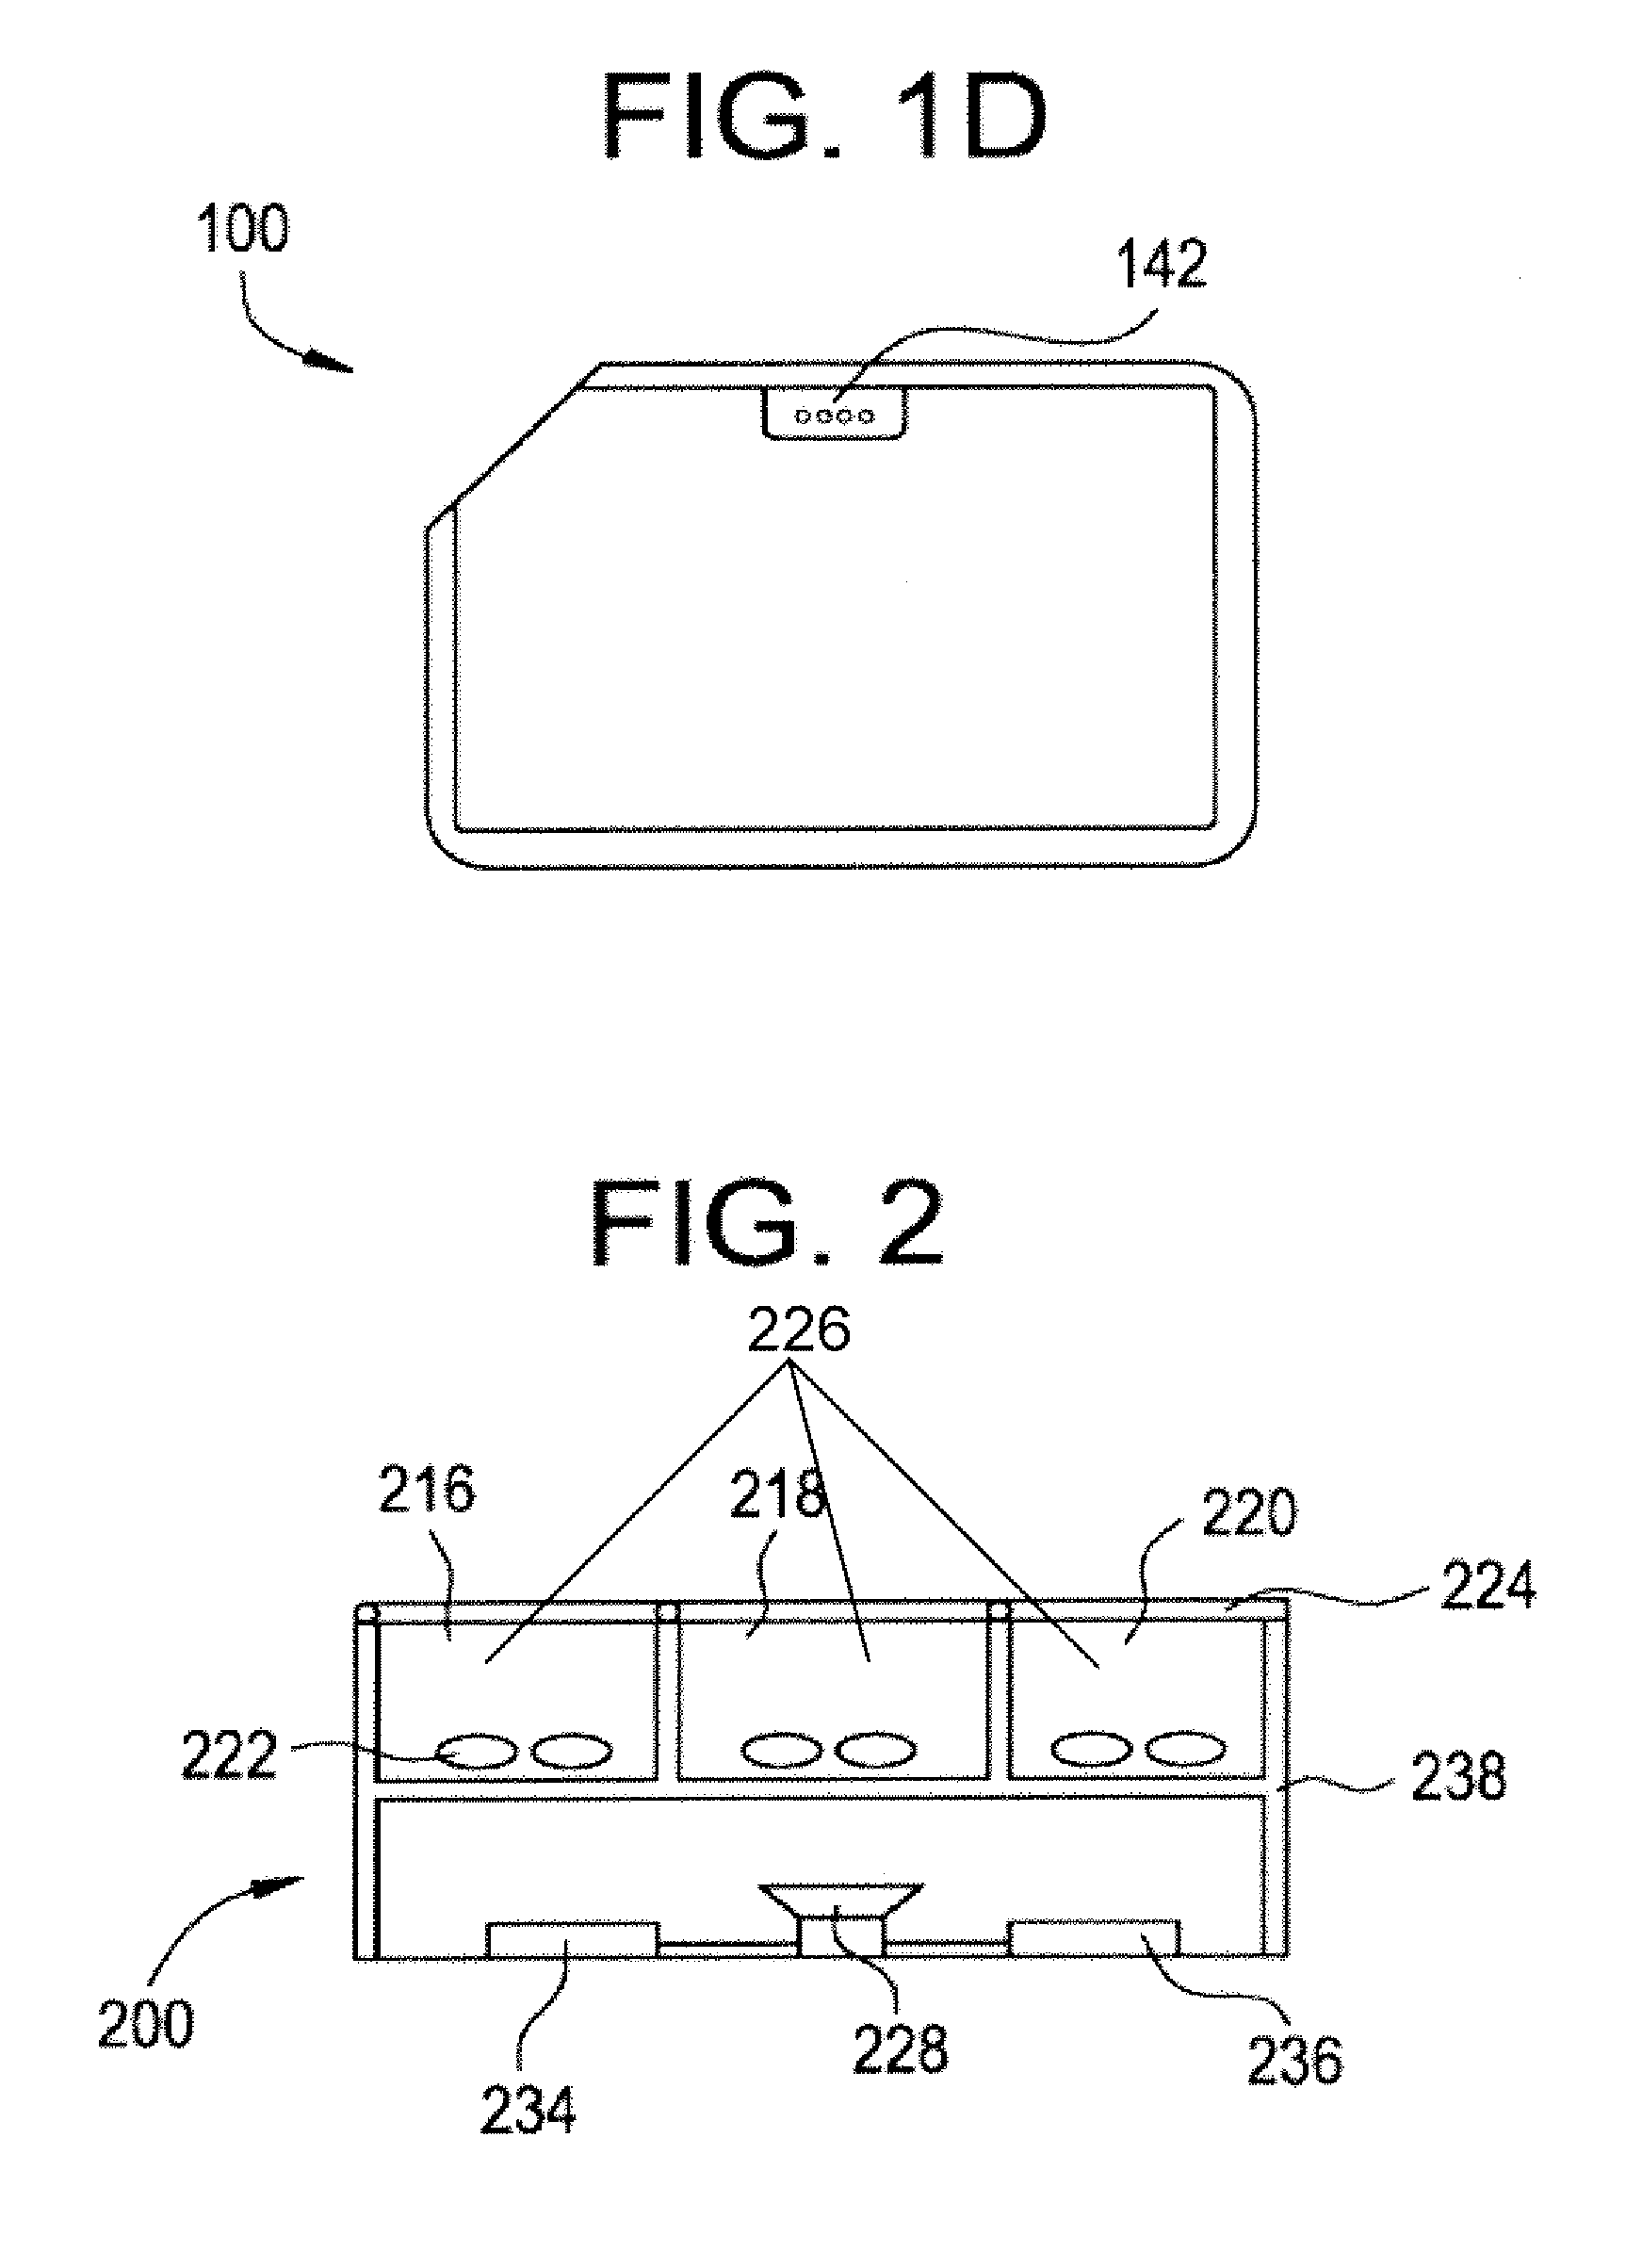 Medication dispenser with integrated monitoring system